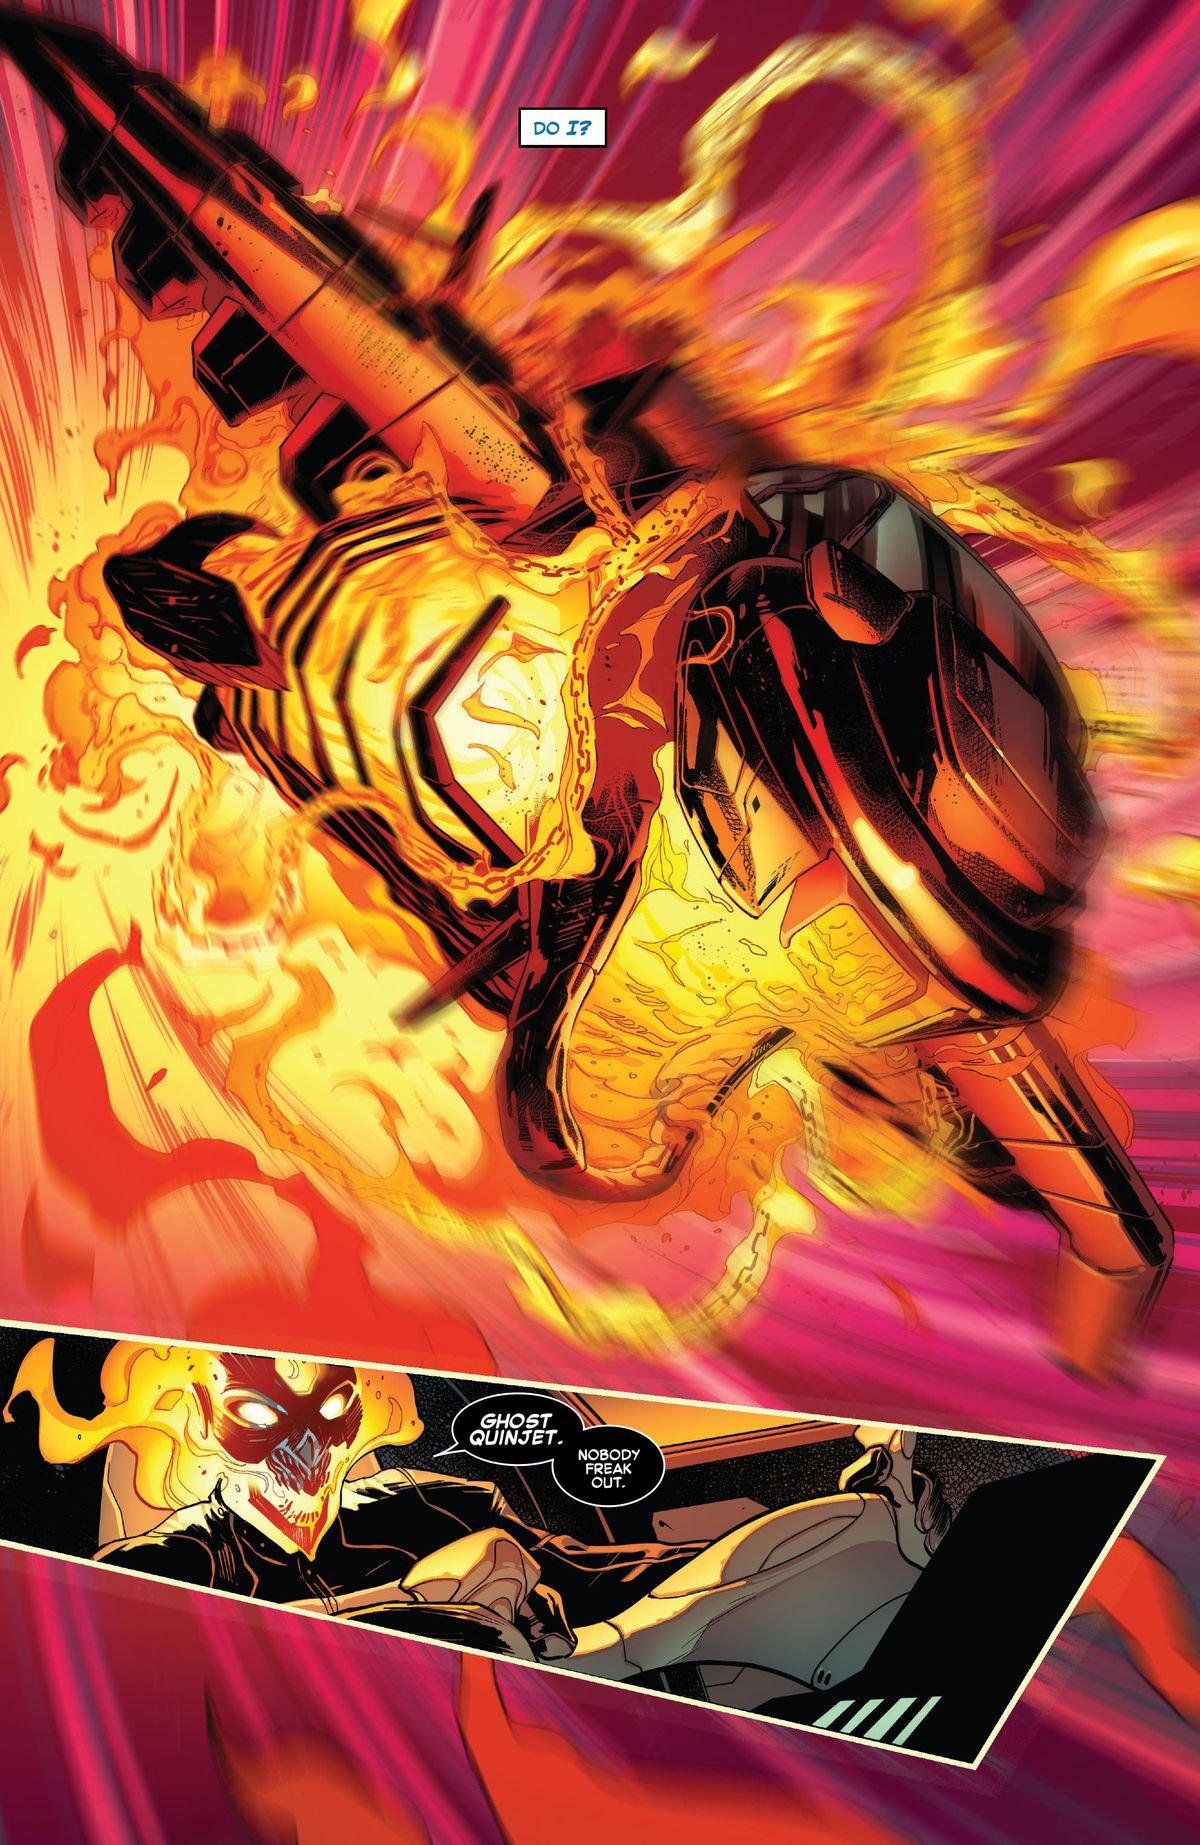 An Avengers quinjet bursts into demonic flame as Ghost Rider takes the helm. “Ghost quinjet,” he says, “Nobody freak out,” in Empyre #1, Marvel Comics (2020). 